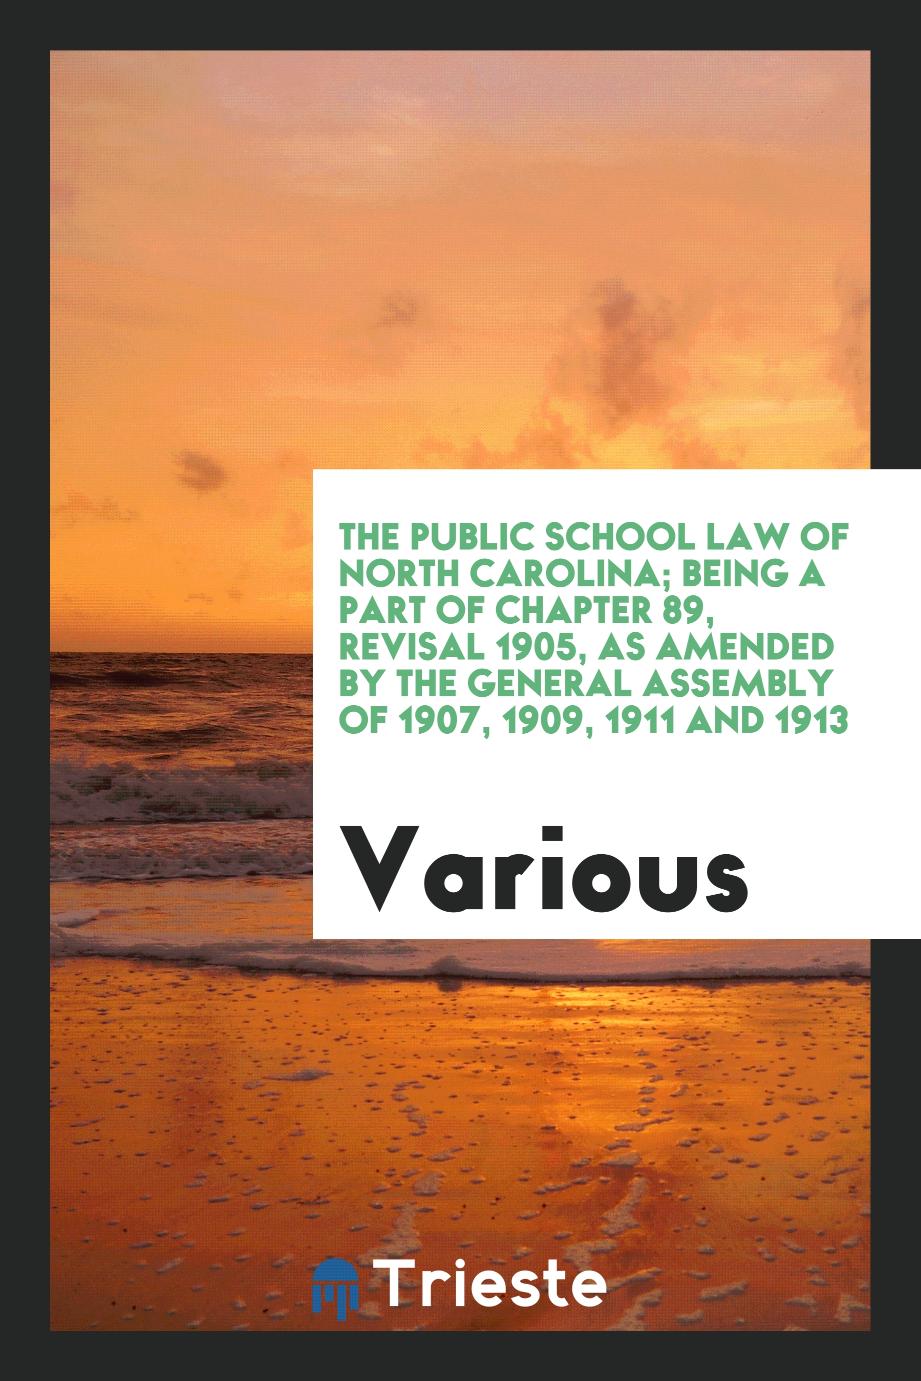 The public school law of North Carolina; being a part of chapter 89, revisal 1905, as amended by the General assembly of 1907, 1909, 1911 and 1913